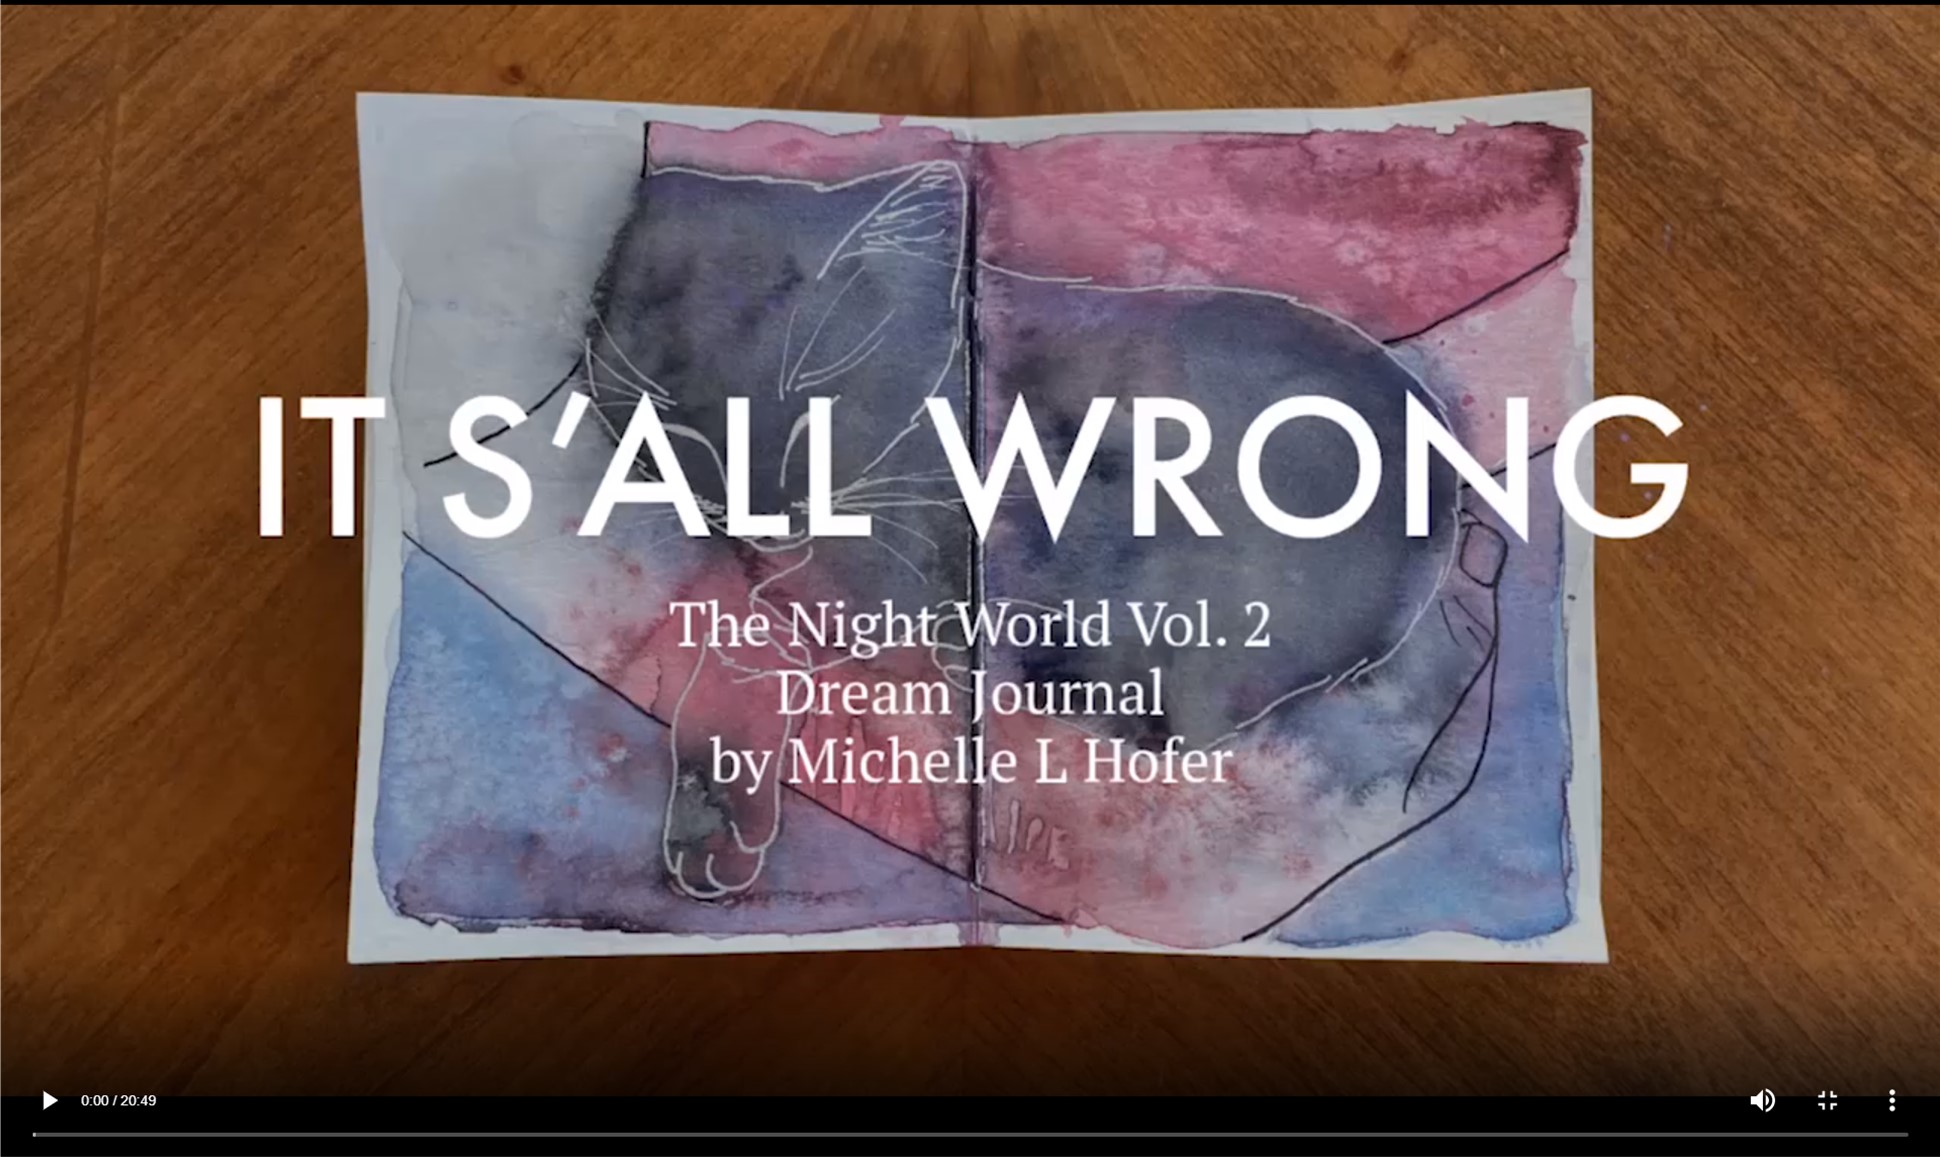 It S'all Wrong Video Link - The Night World Vol. 2 Dream Journal by Michelle L Hofer